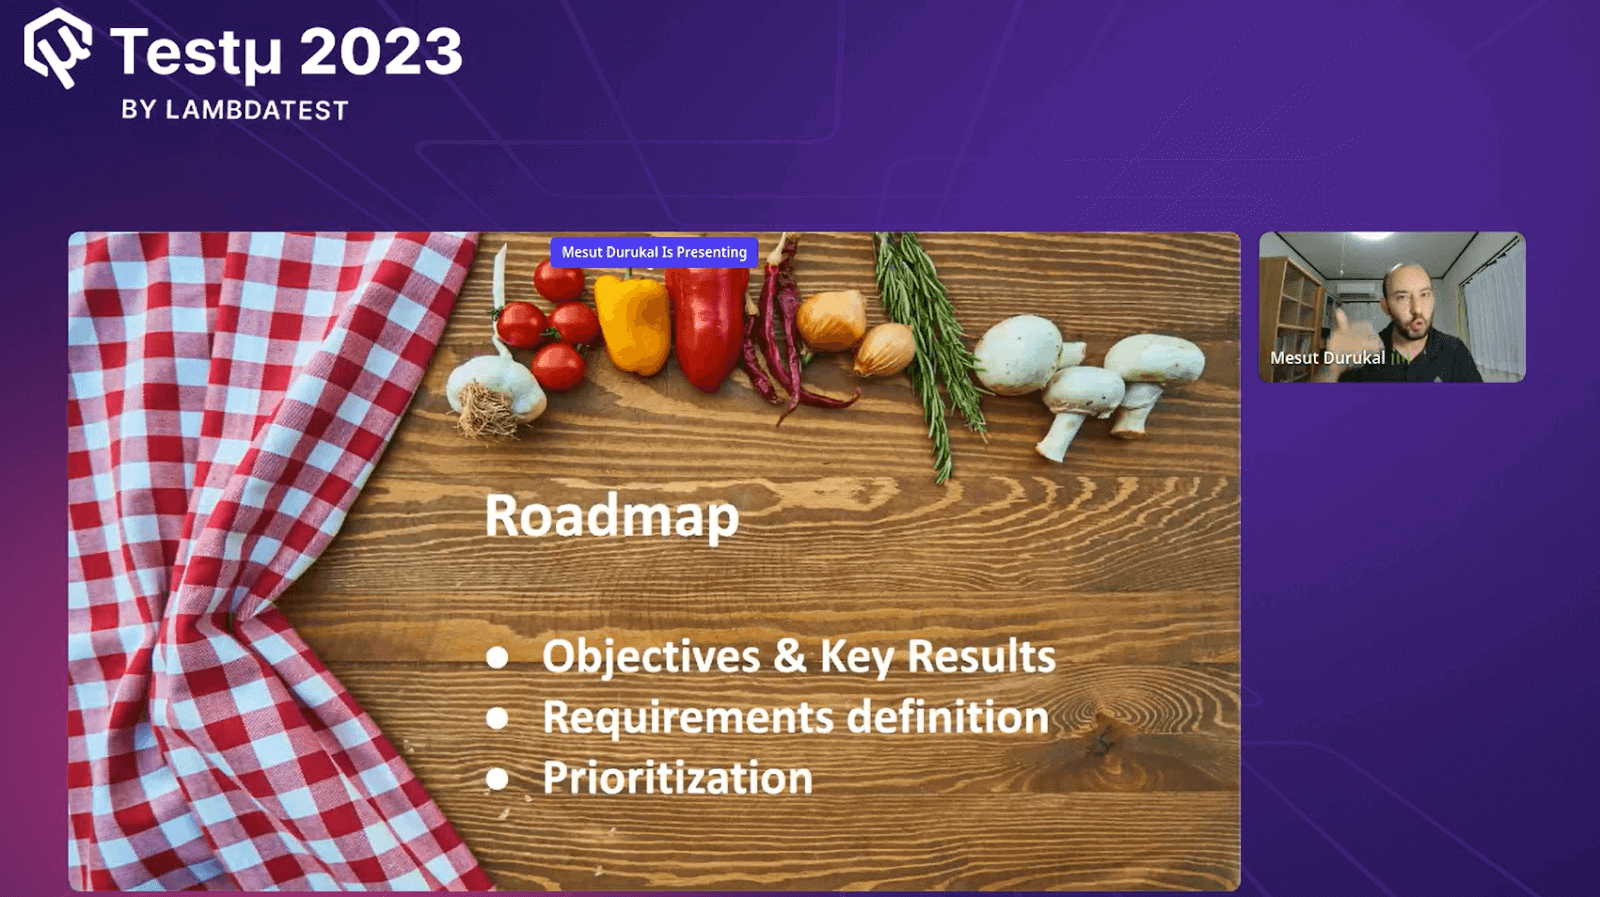 Roadmap to Achieve Targets